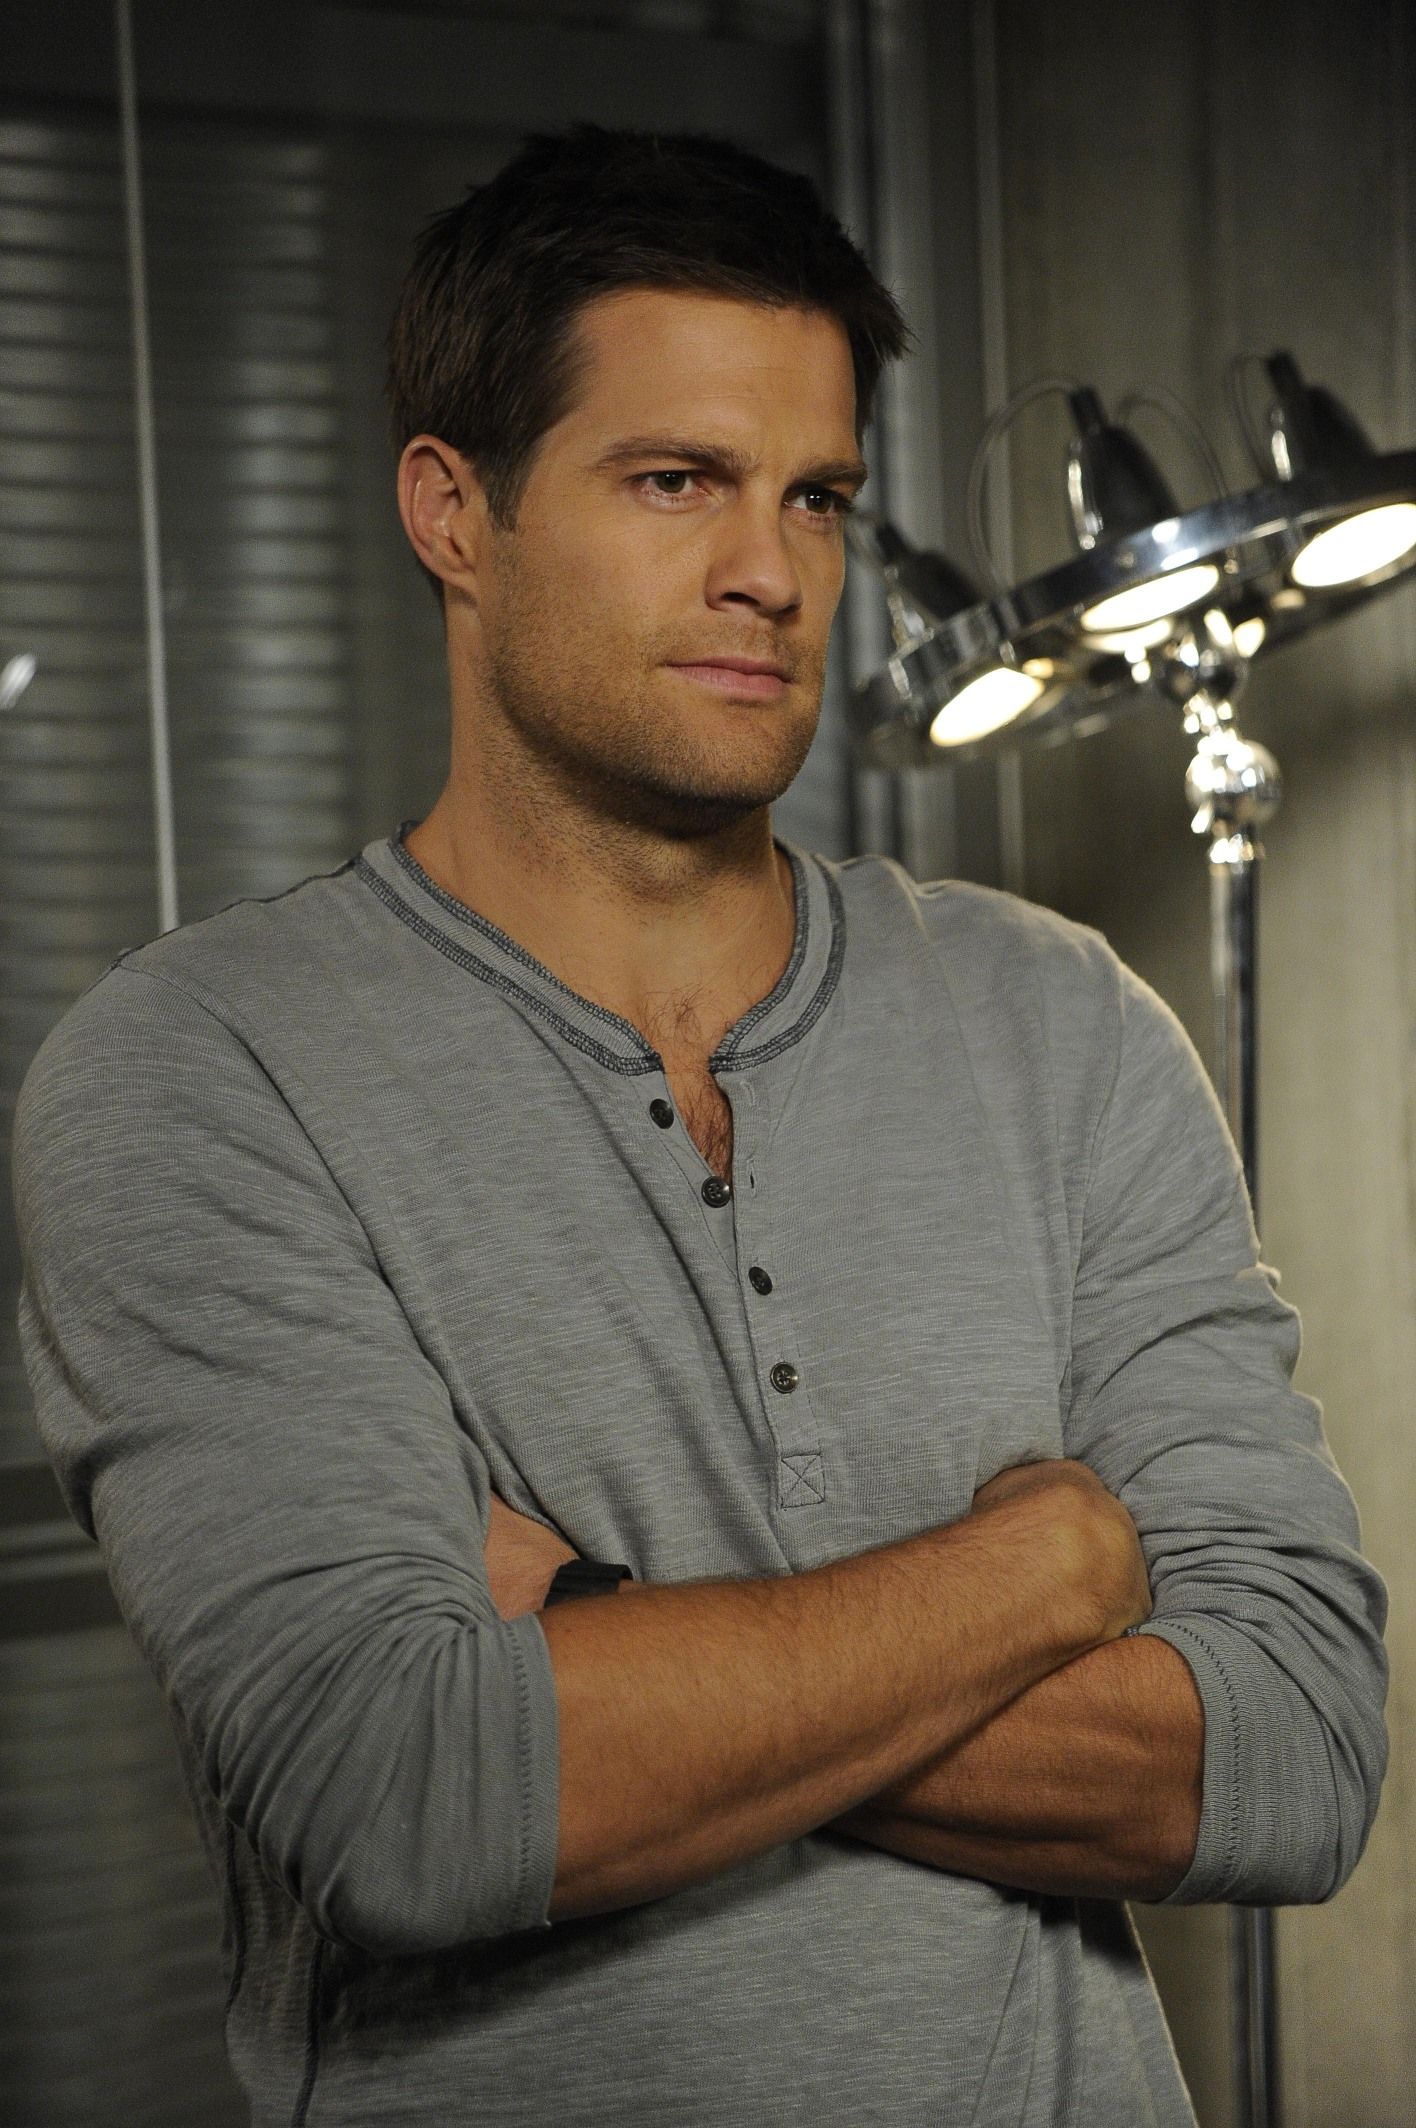 Pictures of Geoff Stults.